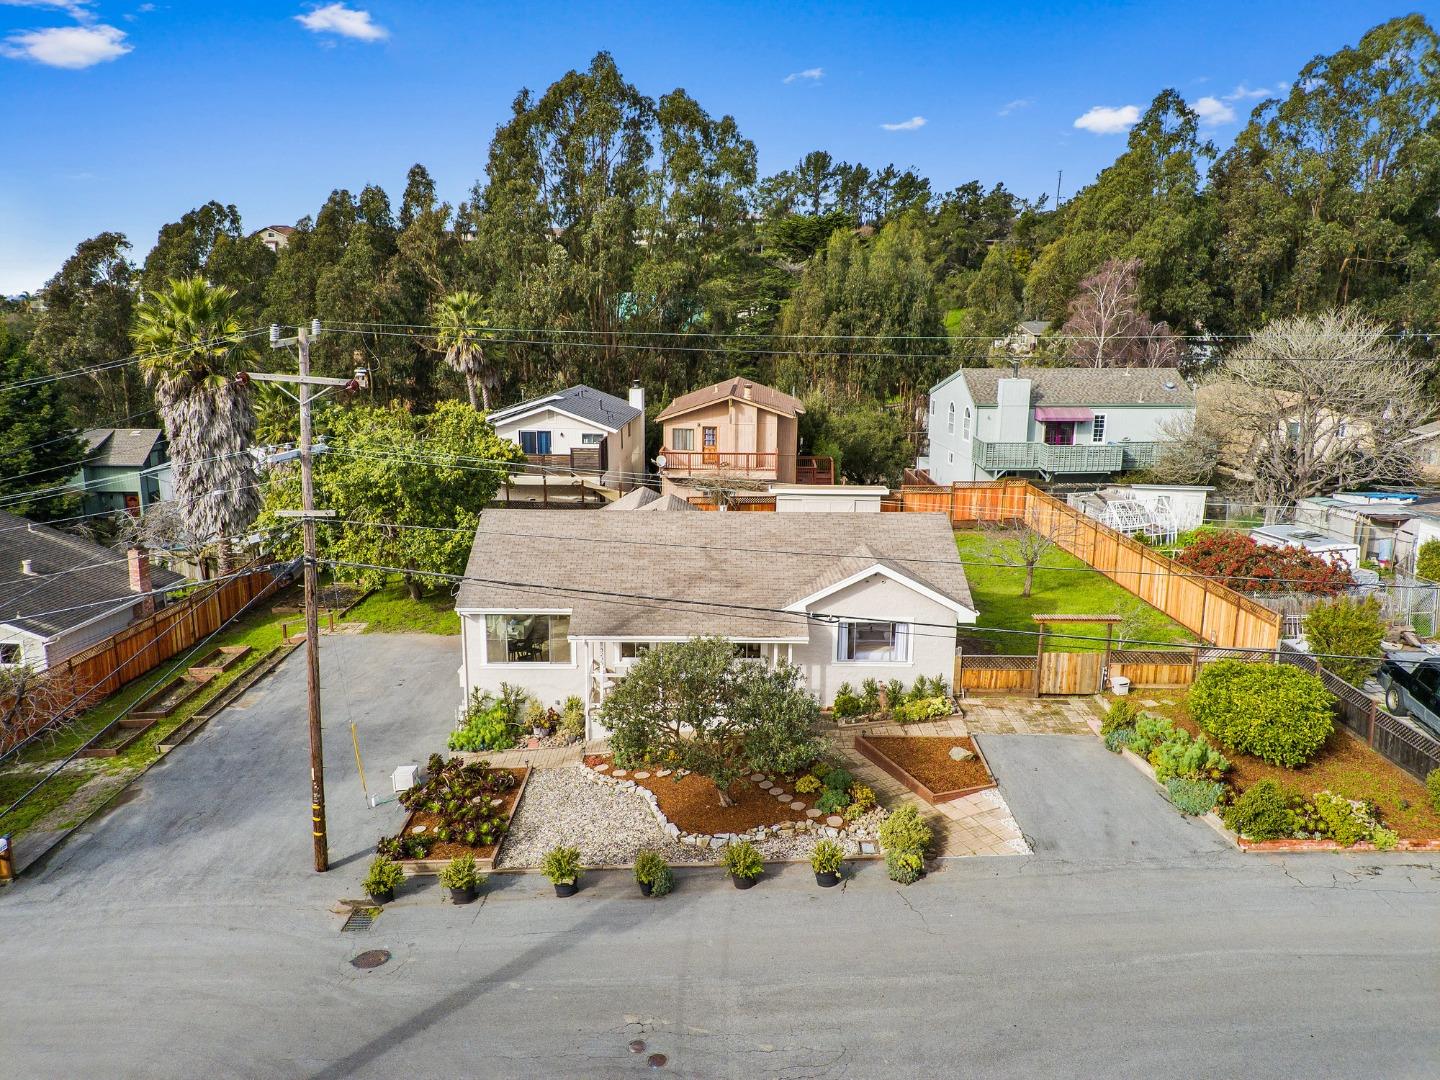 3235 Putter Dr, Soquel, California, 95073, United States, 2 Bedrooms Bedrooms, ,1 BathroomBathrooms,Residential,For Sale,3235 Putter Dr,1451513